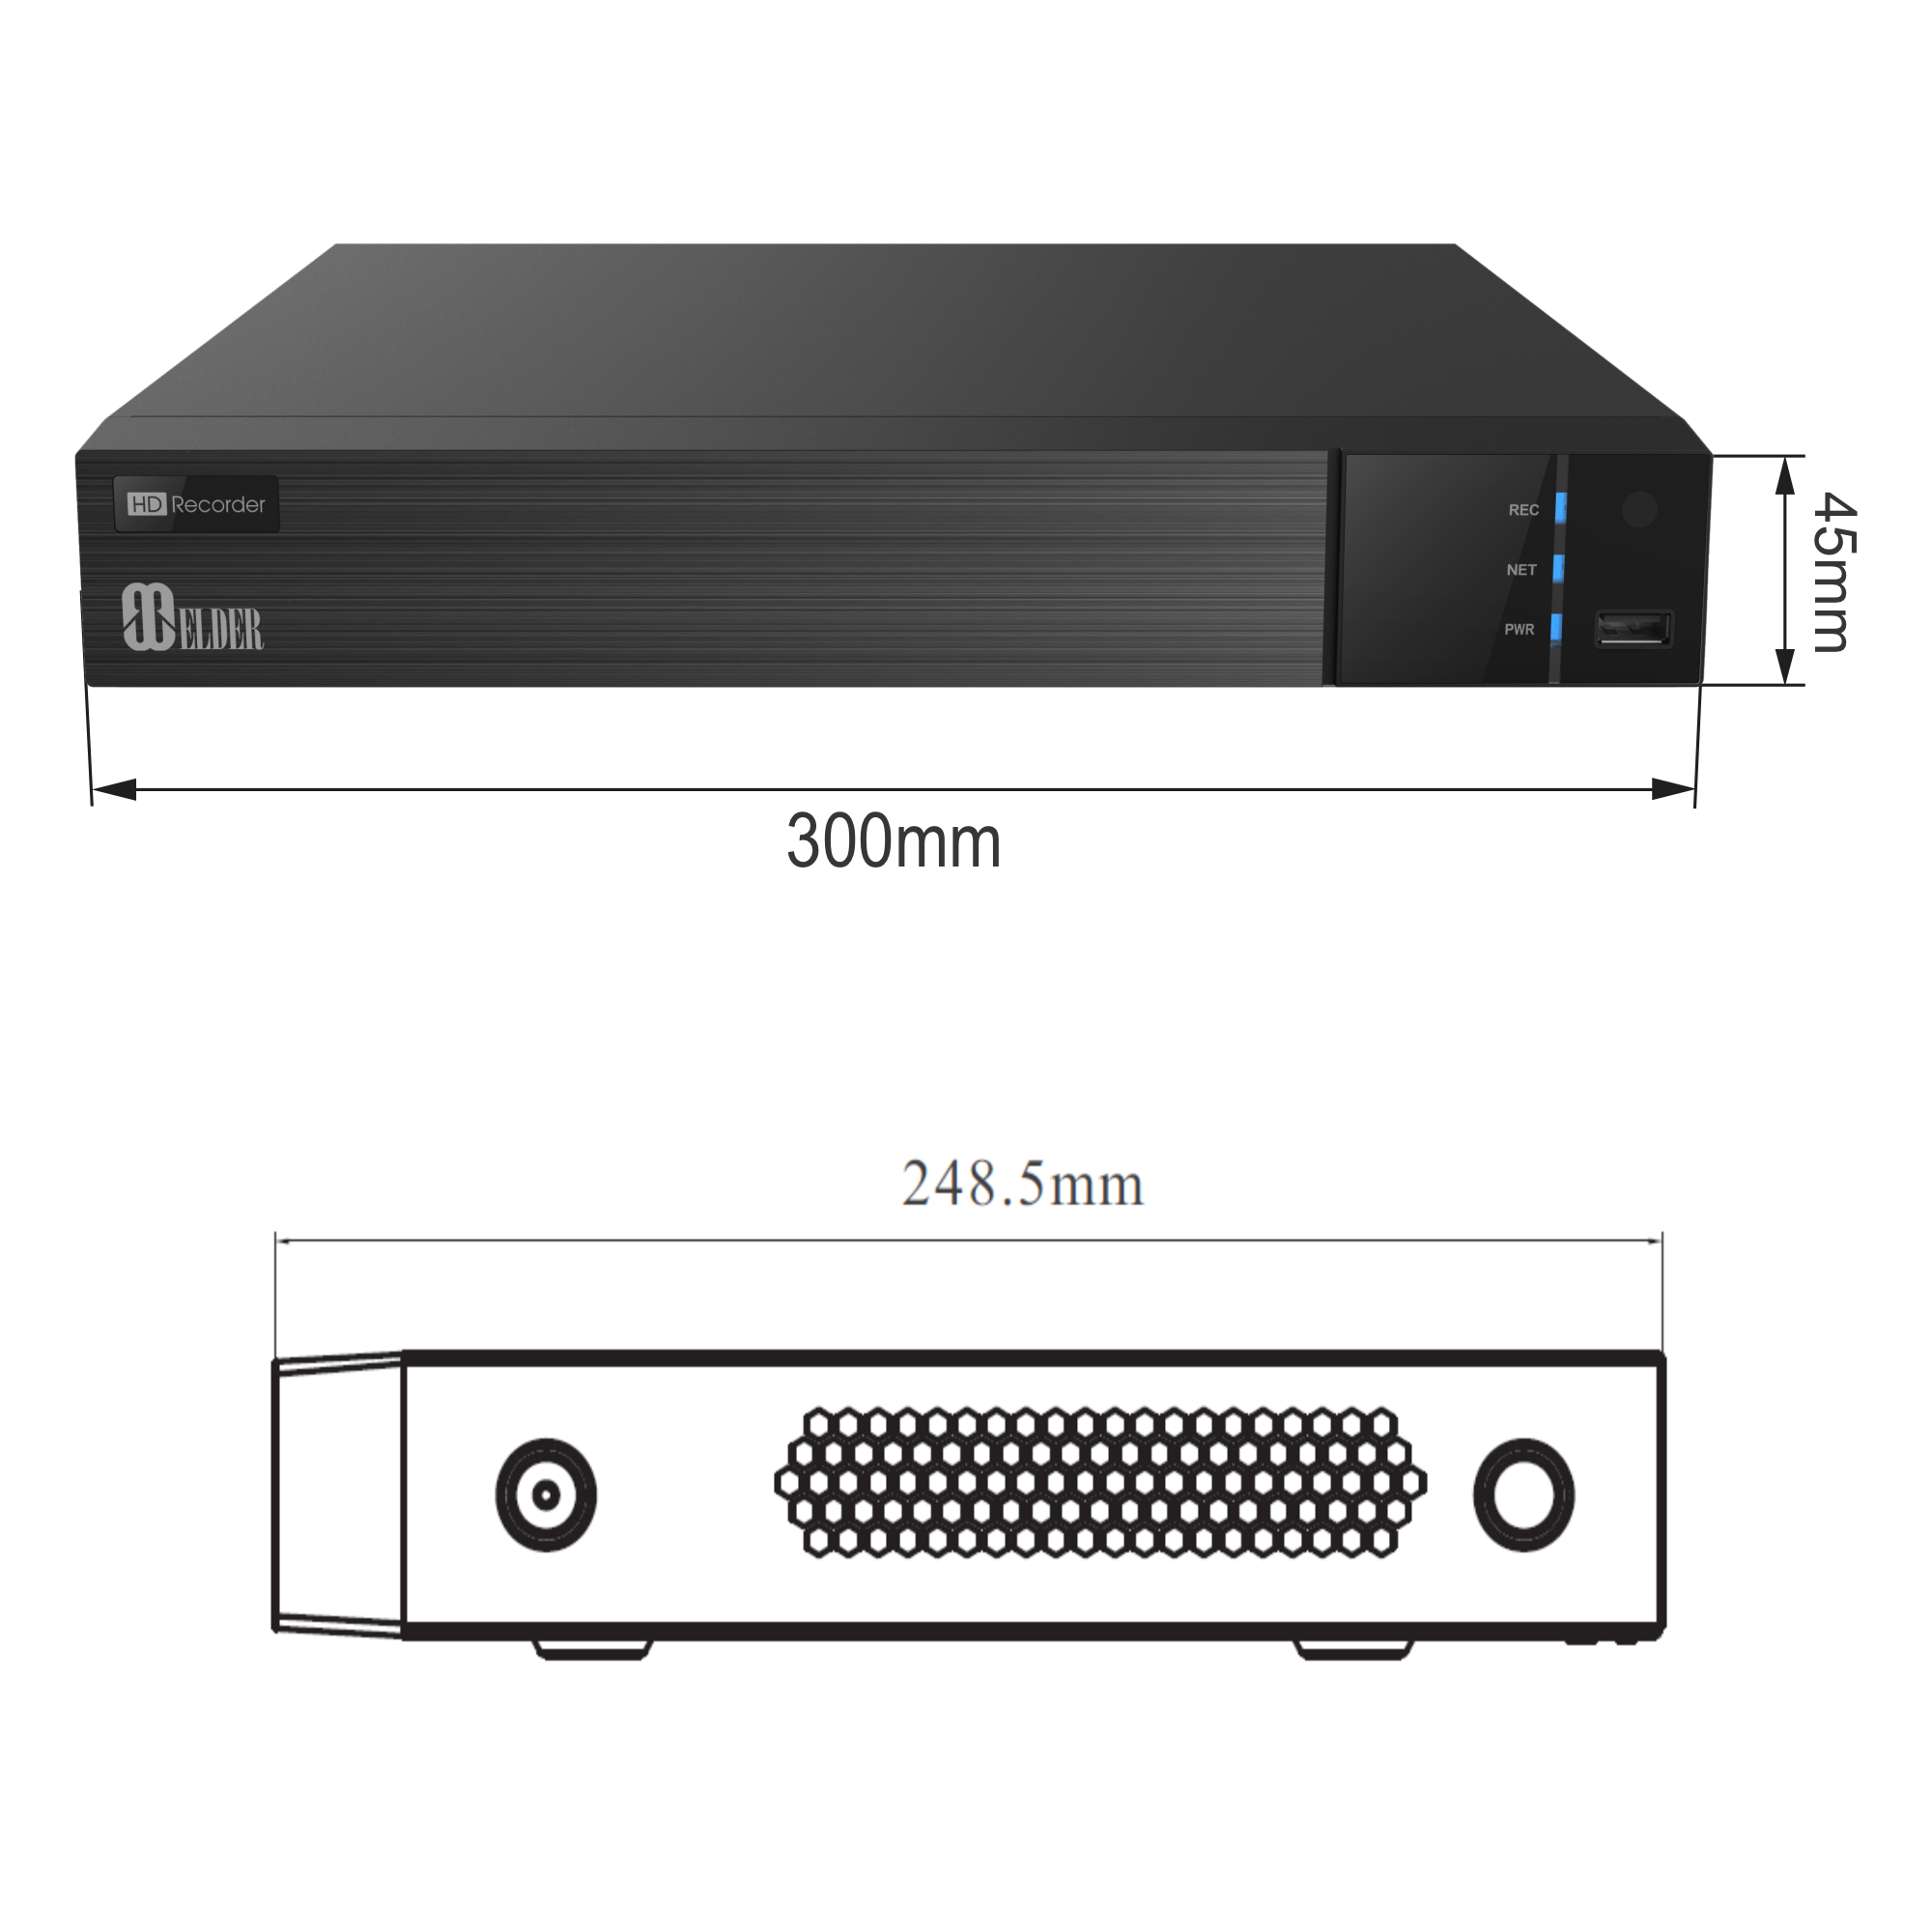 4K NVR Security PoE 4-Channel Up to 8MP, Intelligent Features, Two-Way Audio & Onvif, NVR Surveillance Ultimate-I Series